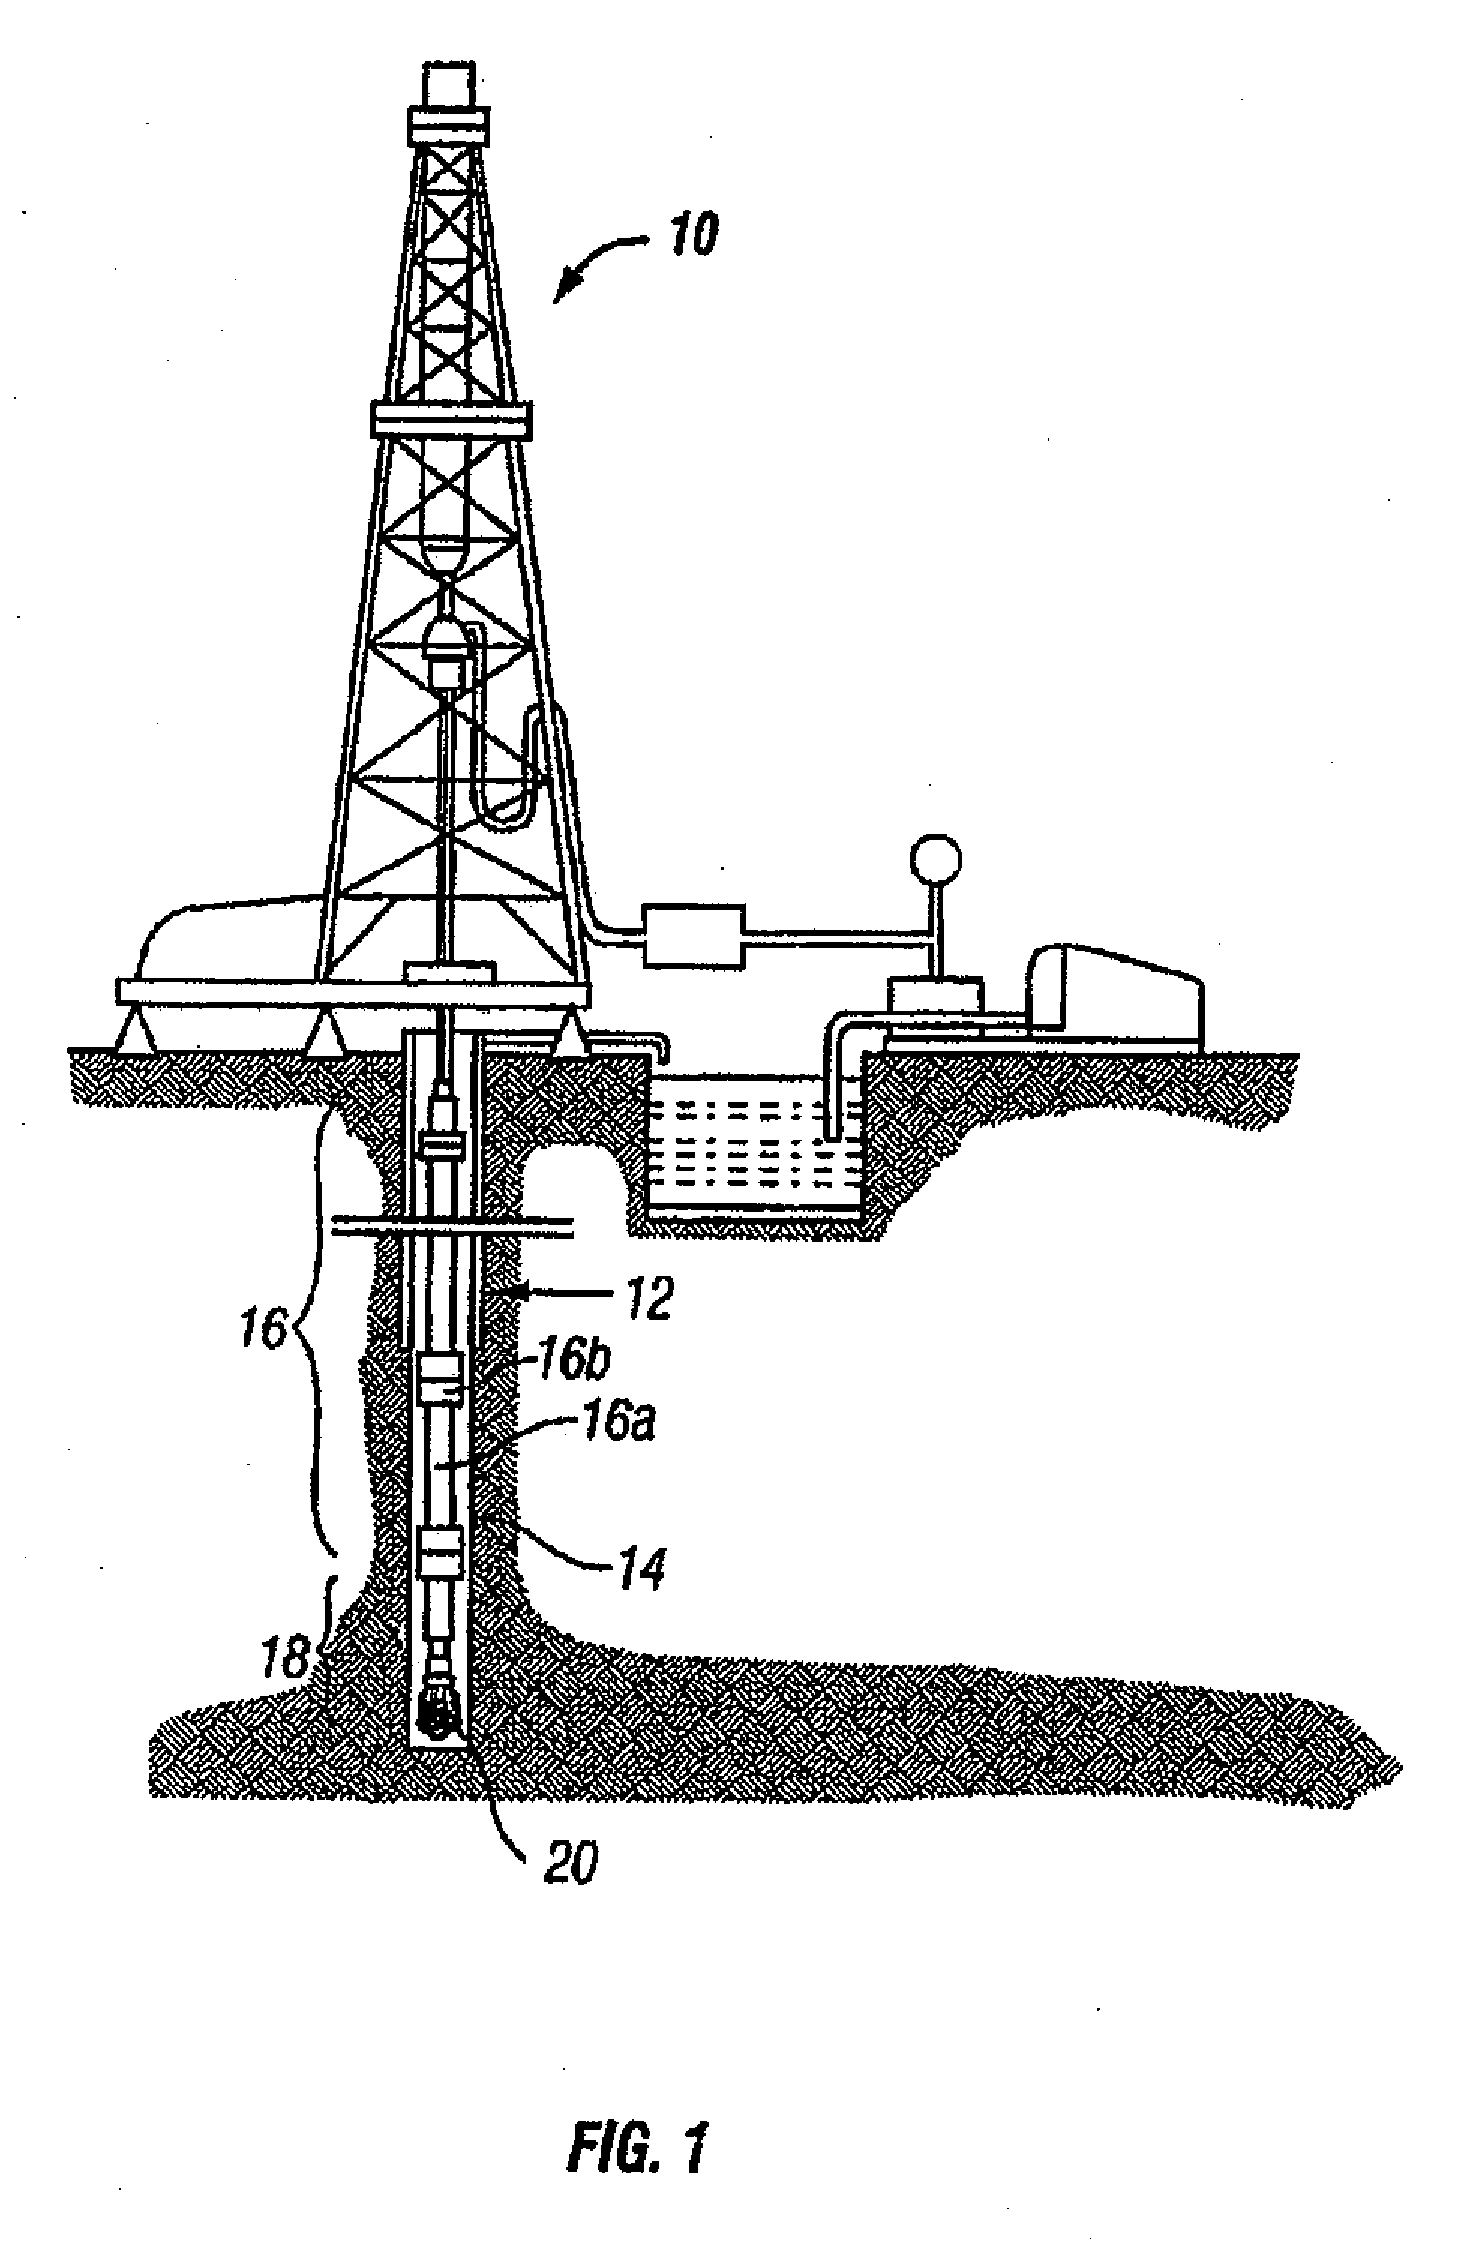 Method of real-time drilling simulation